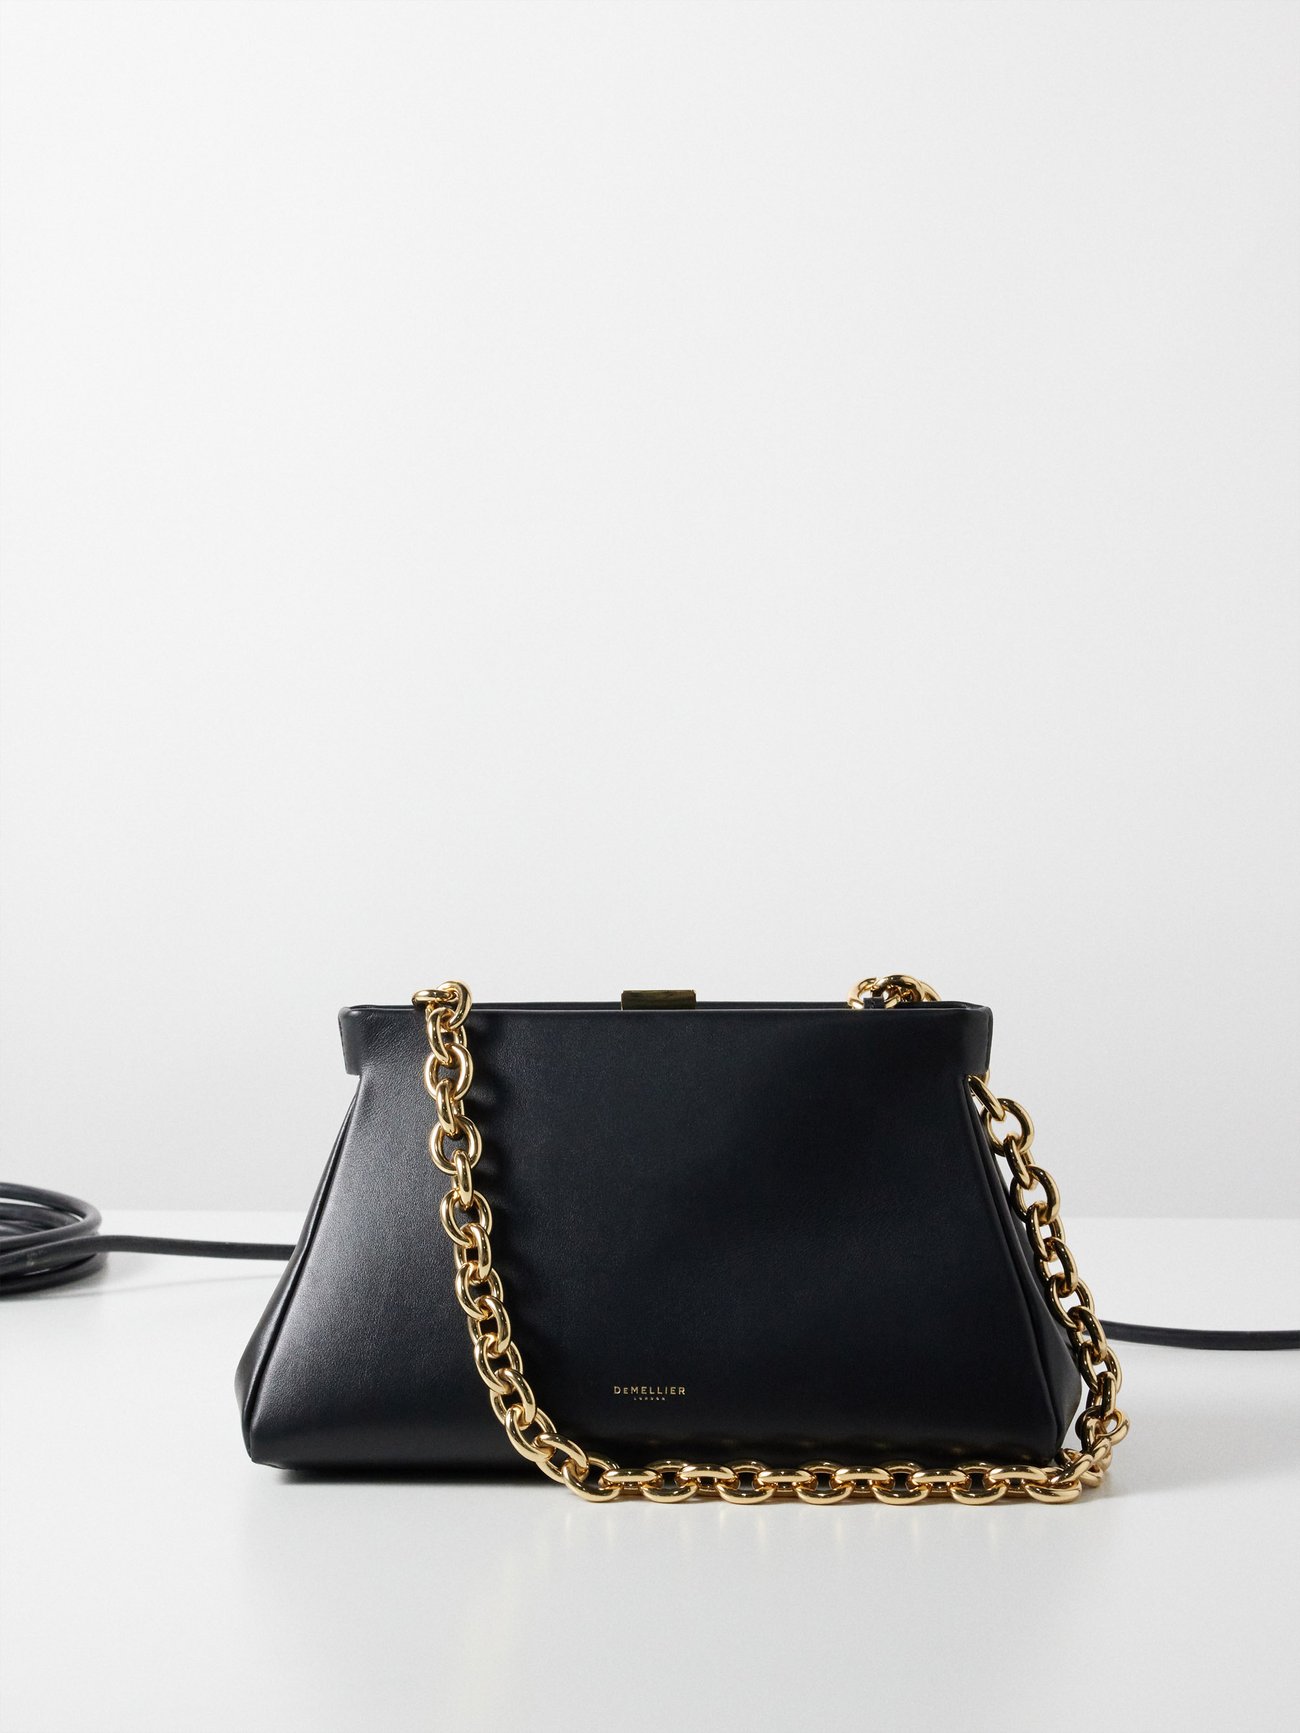 Black Cannes leather clutch bag | DeMellier | MATCHES UK